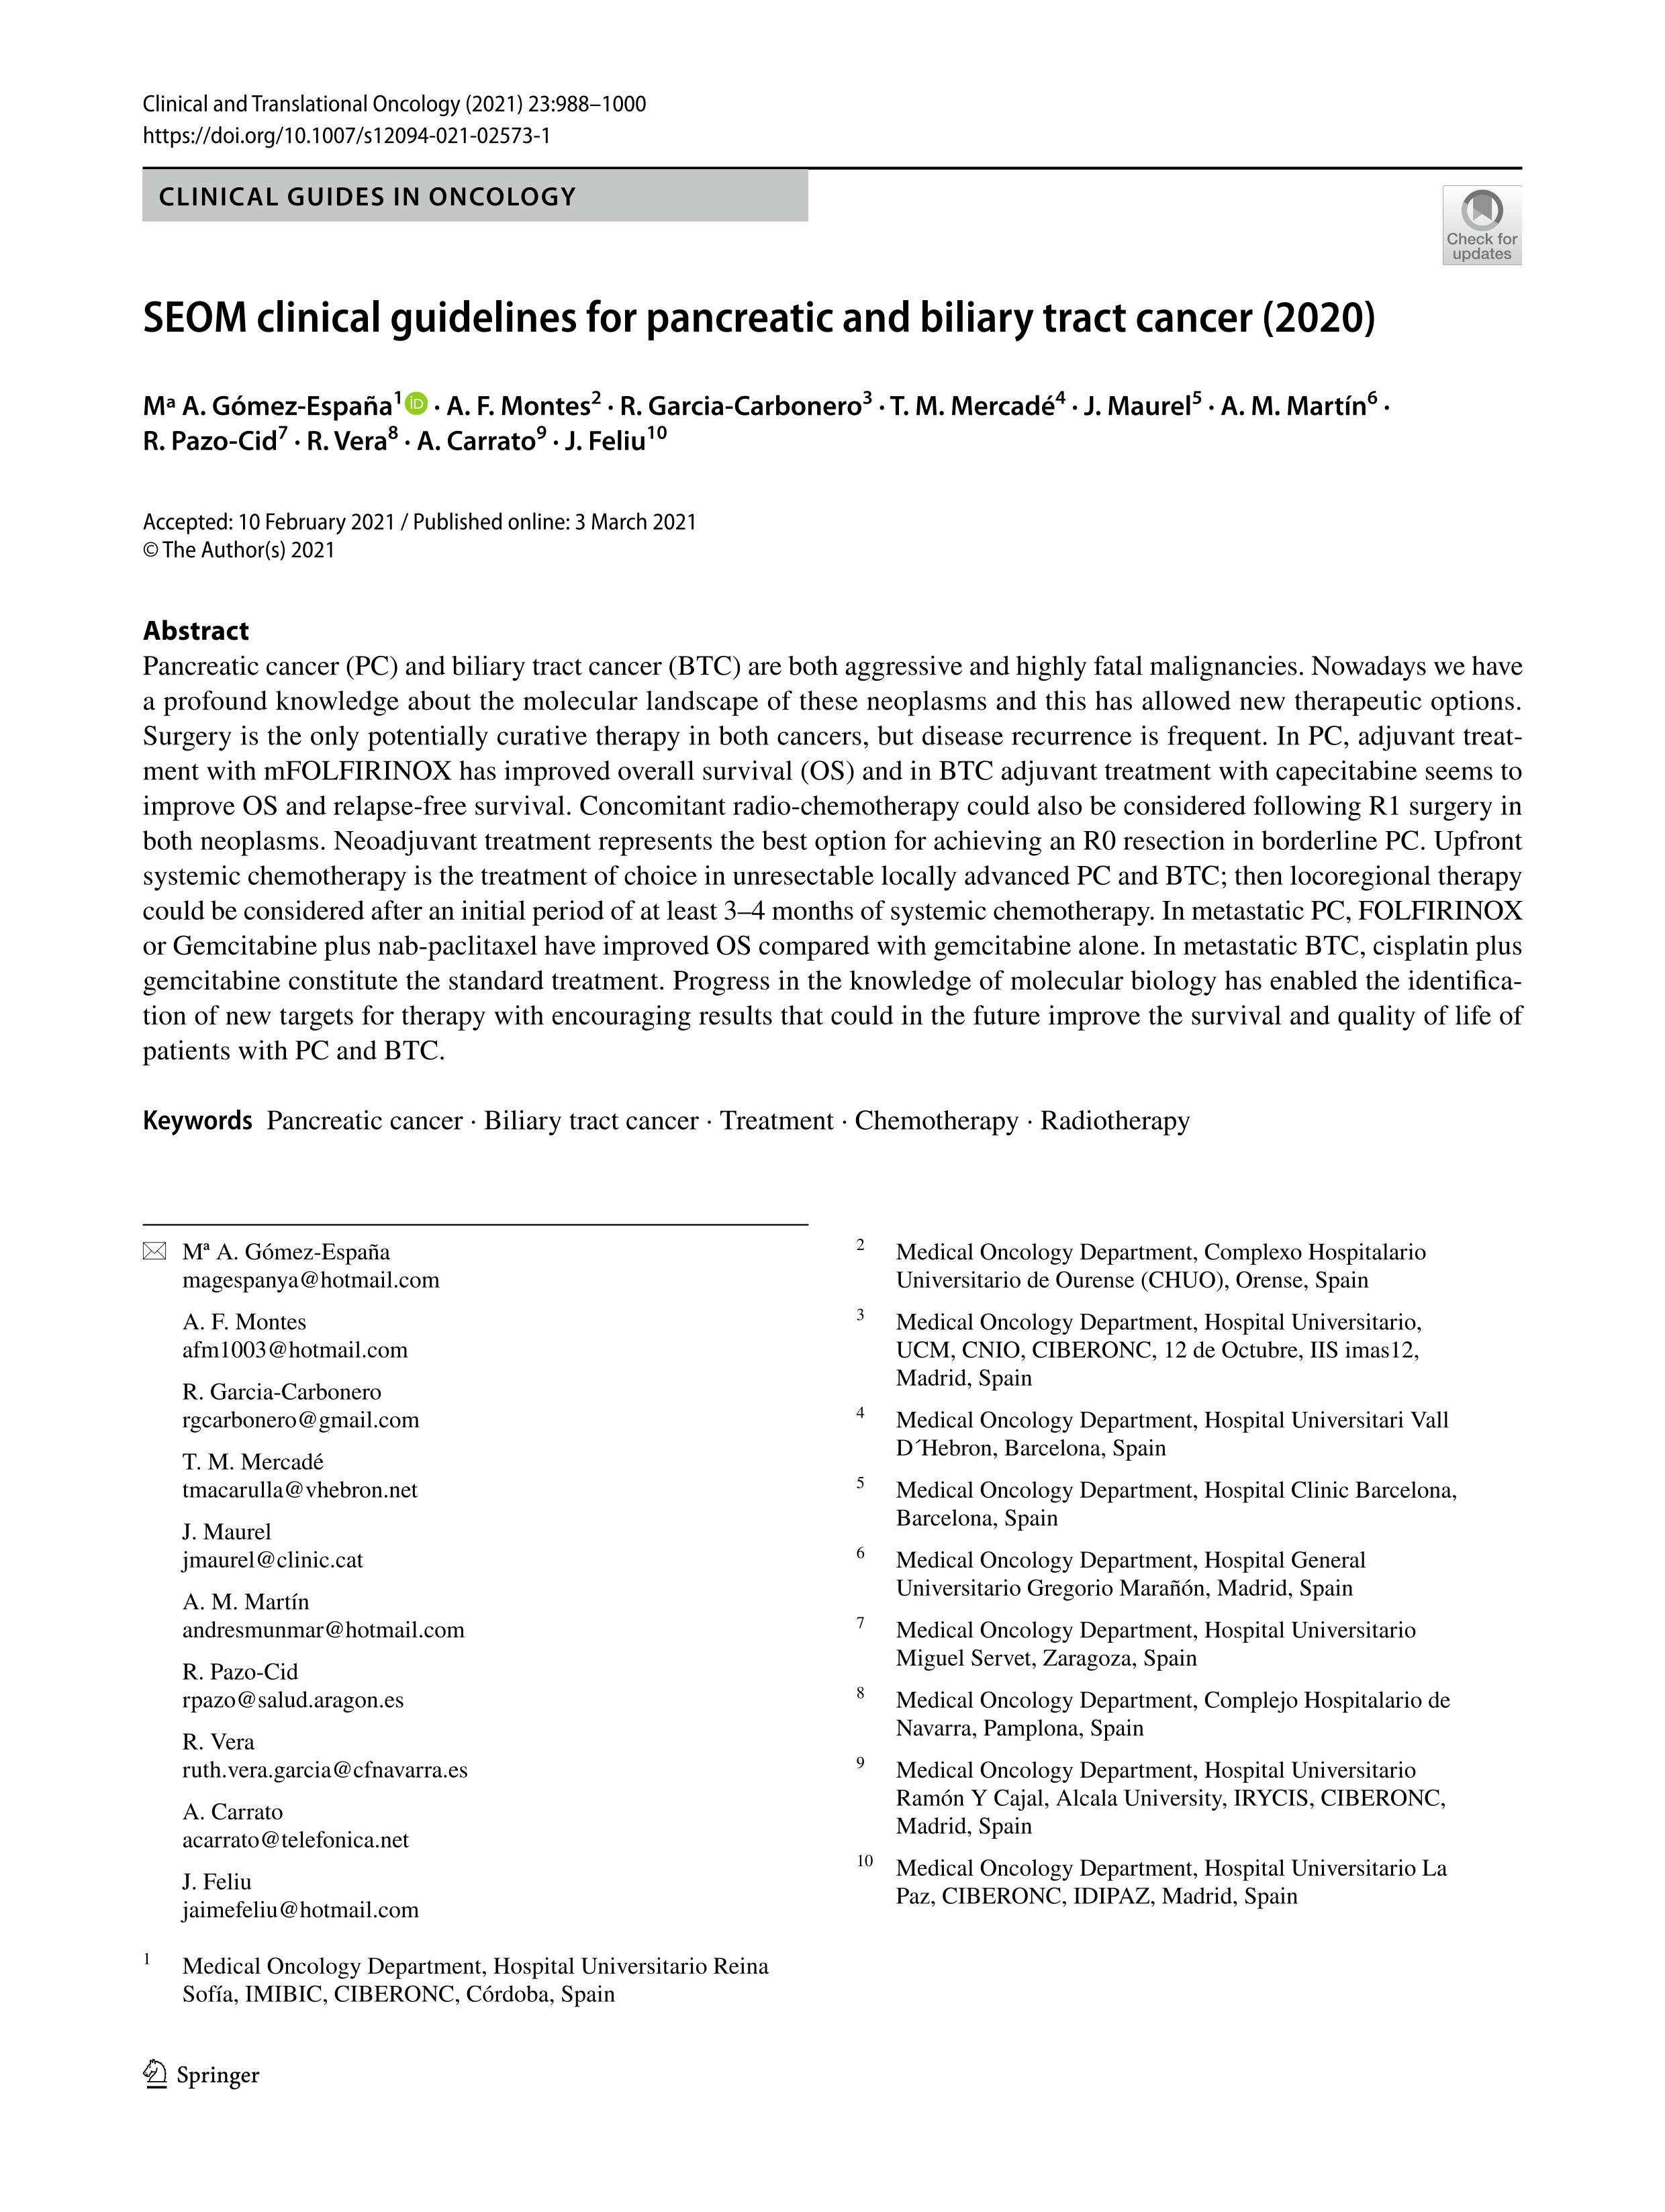 SEOM clinical guidelines for pancreatic and biliary tract cancer (2020)